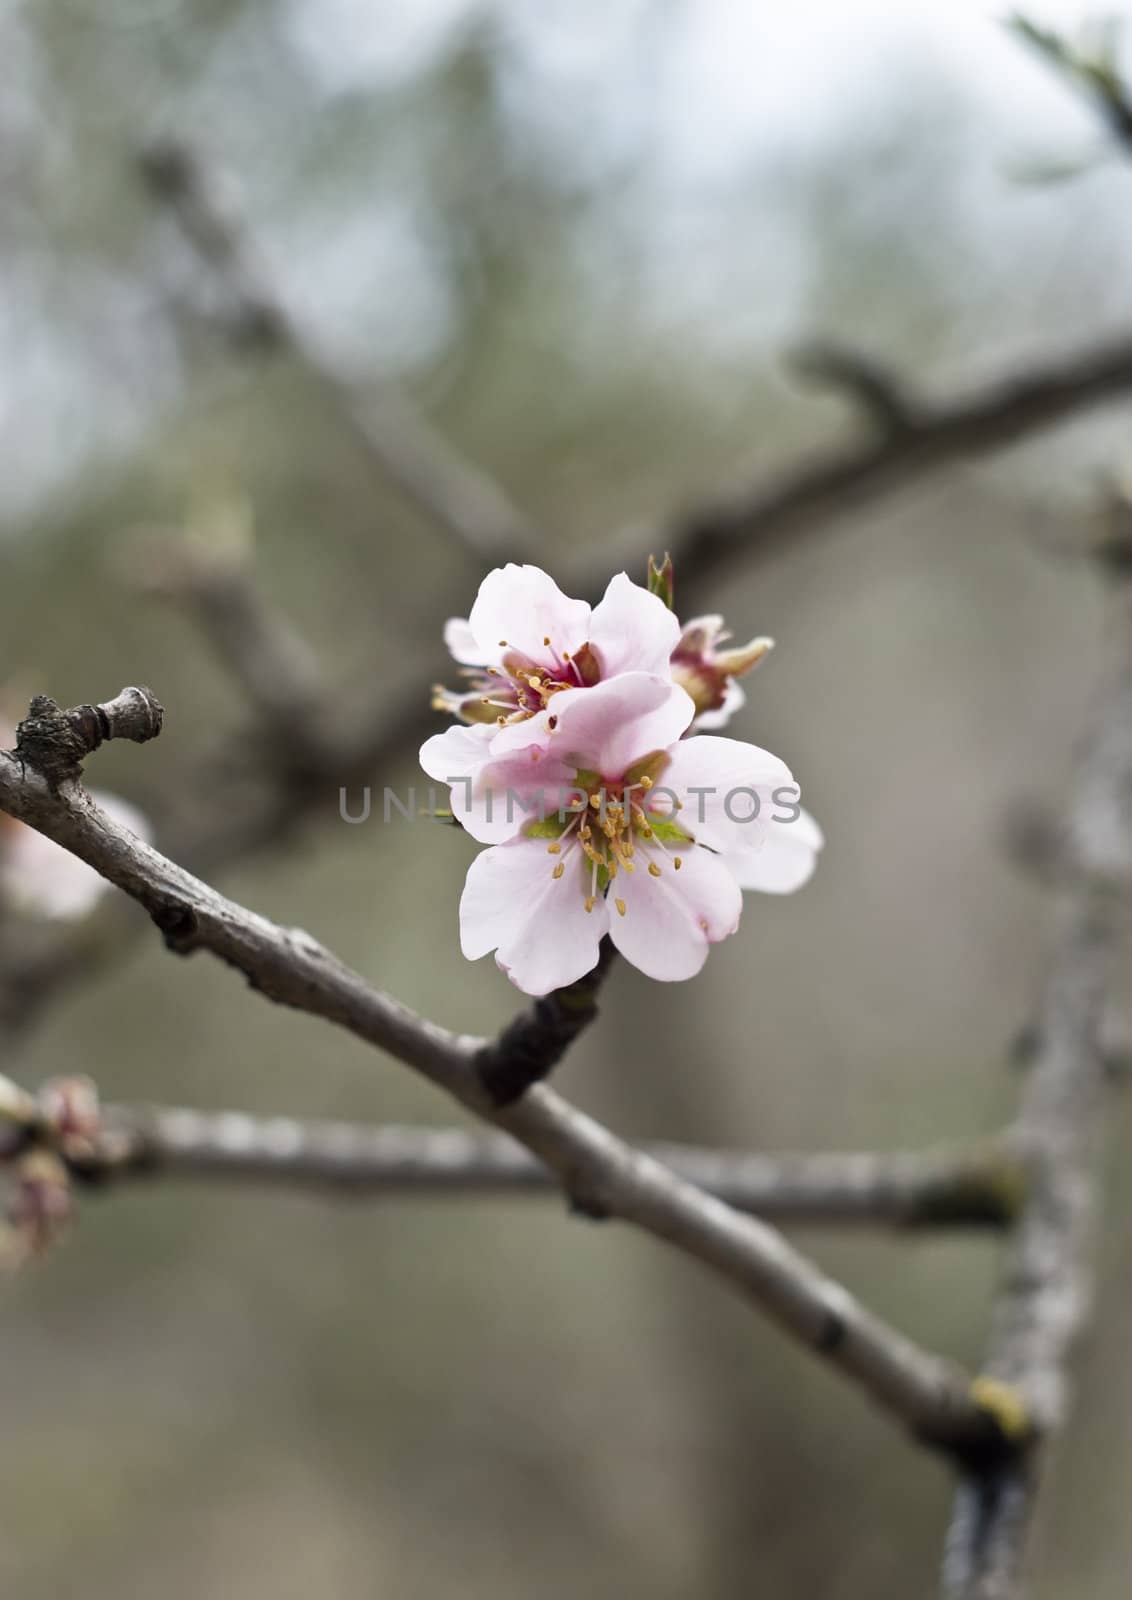 A closeup of an almond tree with white pink flowers with branches